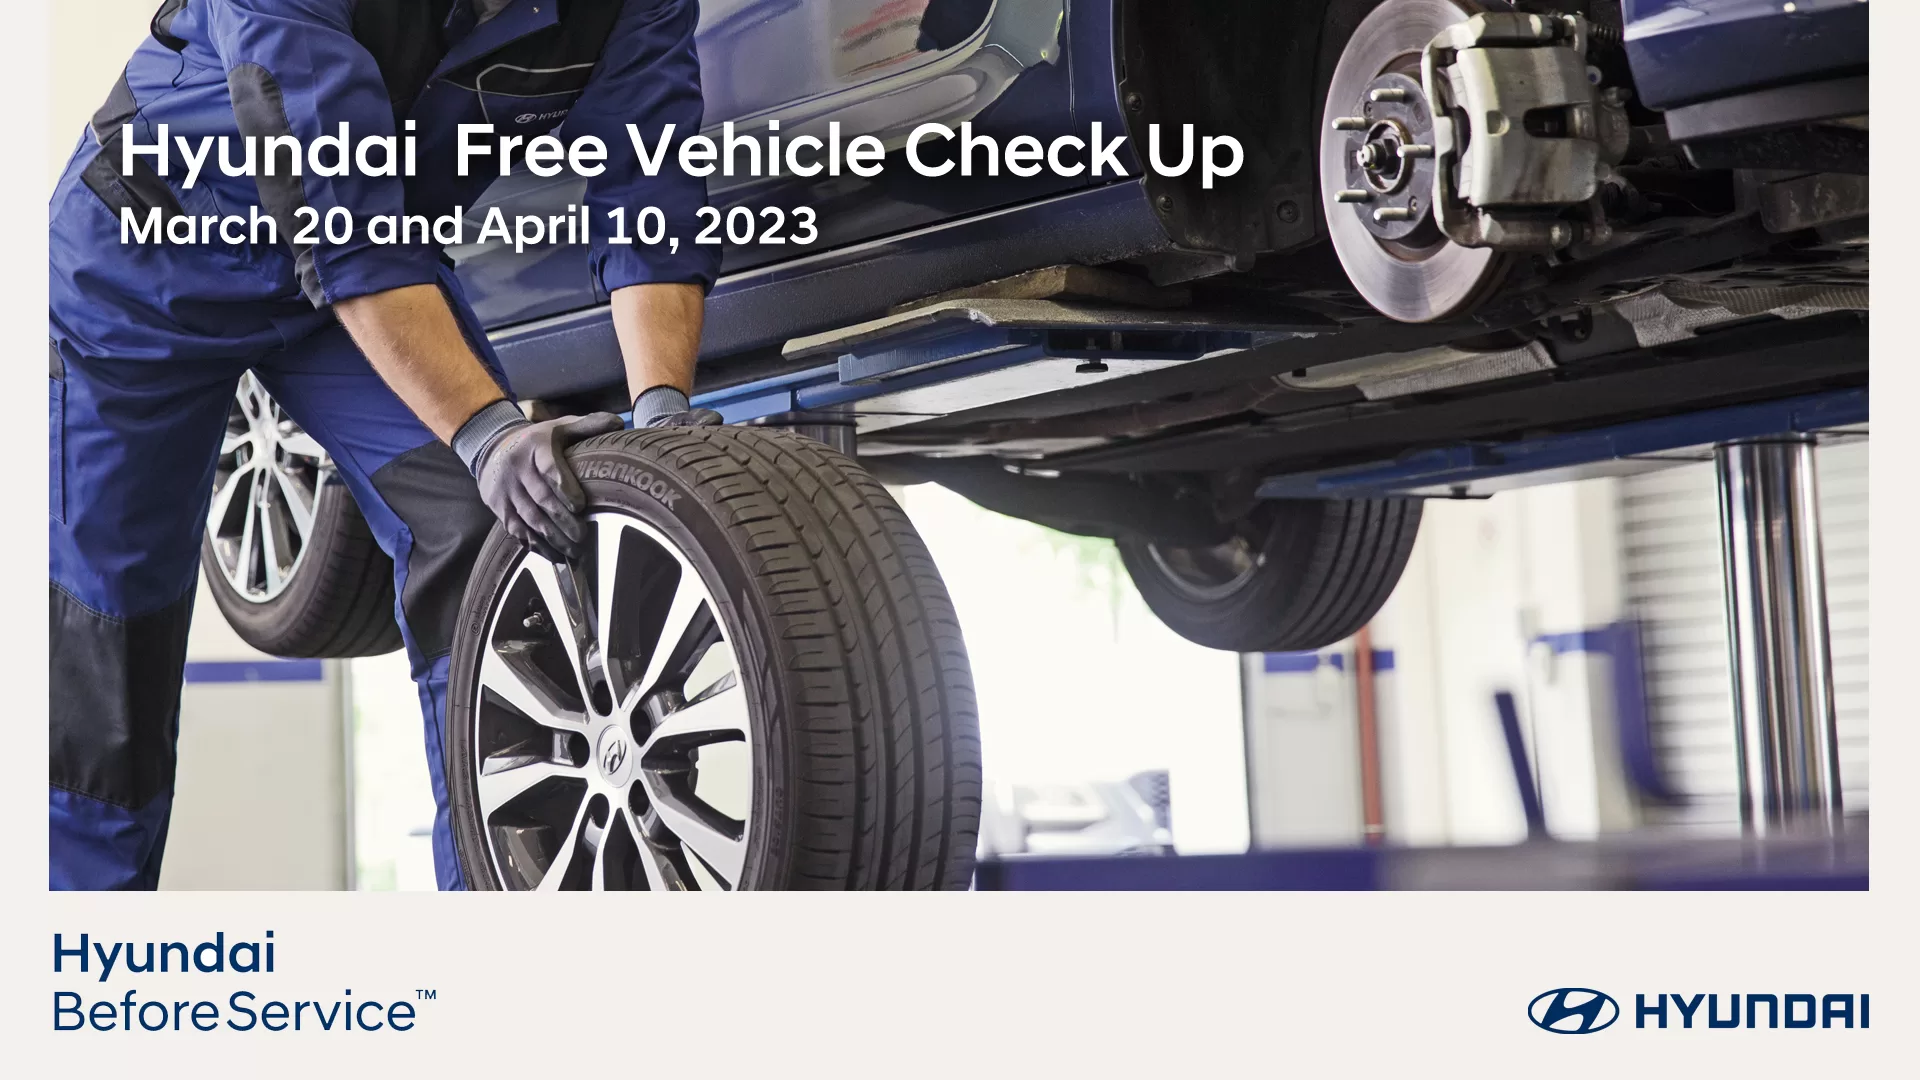 Hyundai PH offering free nationwide vehicle check ups from March 20-April 10, 2023